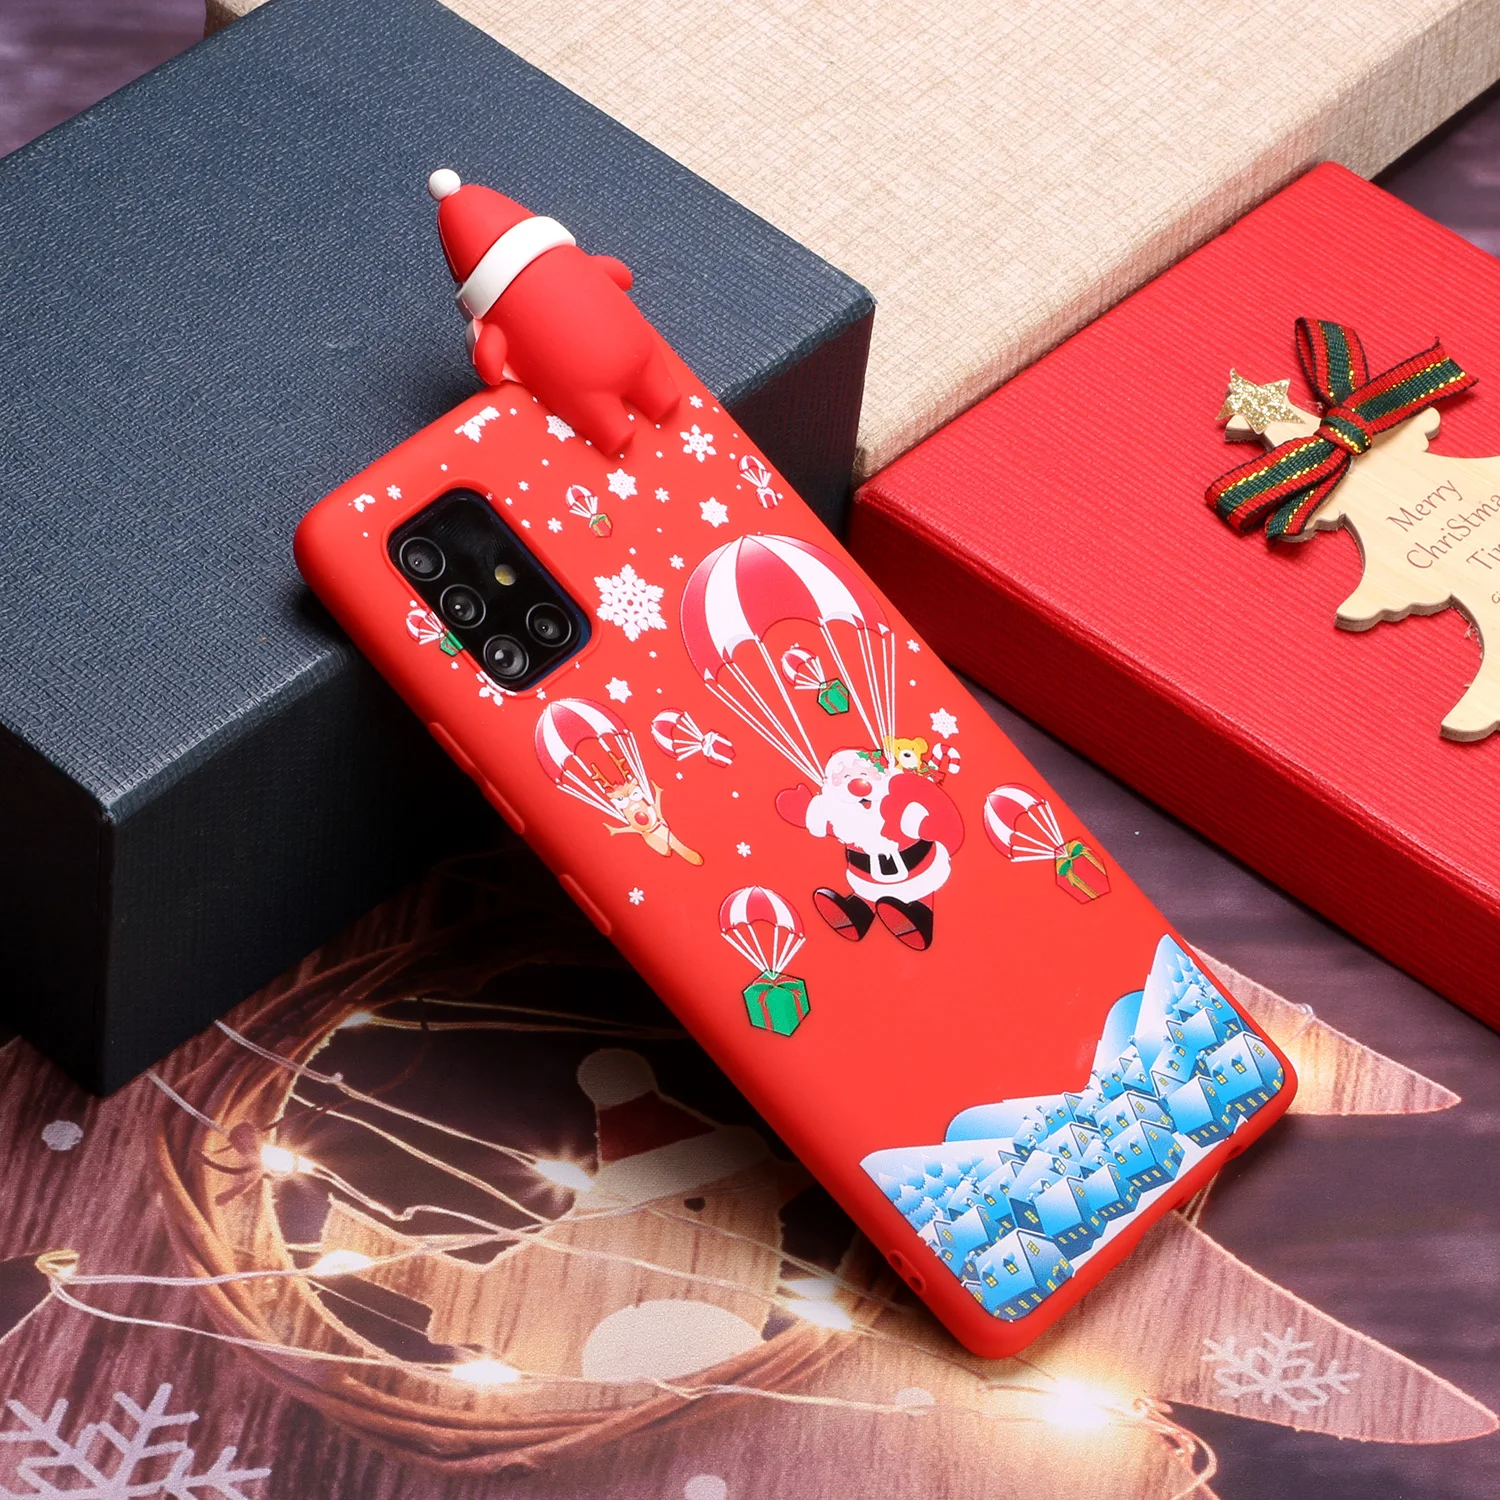 

For Samsung Galaxy A31 A41 A51 A71 A81 A91 Note10 Lite S10 Lite 3D Christmas Man Snow Deer Soft Case Phone Back Cover Skin Shell